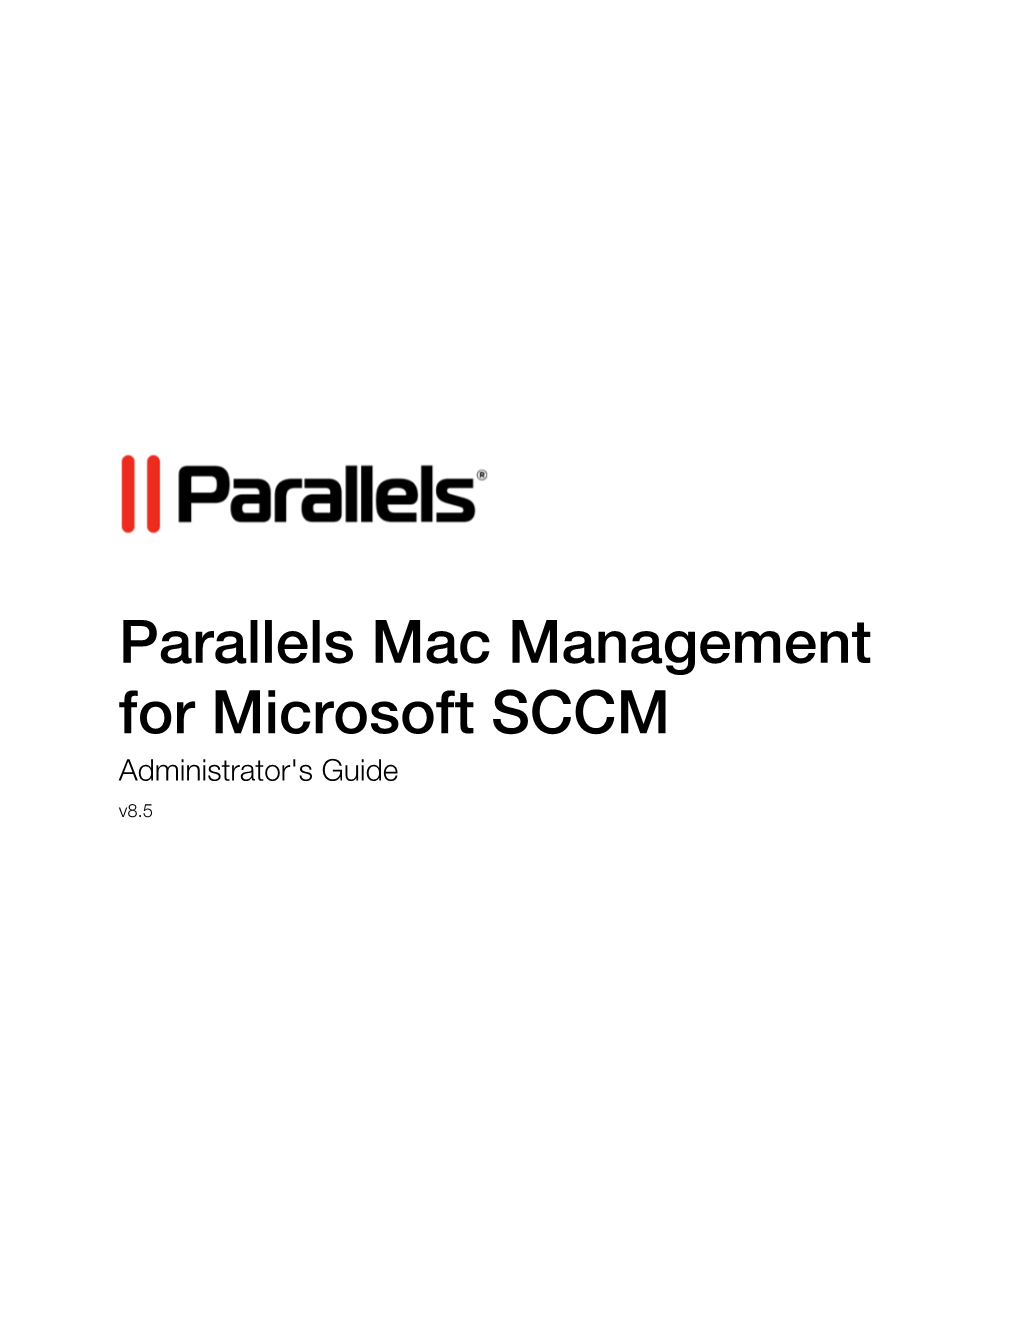 Parallels Mac Management IT Administrator's Guide